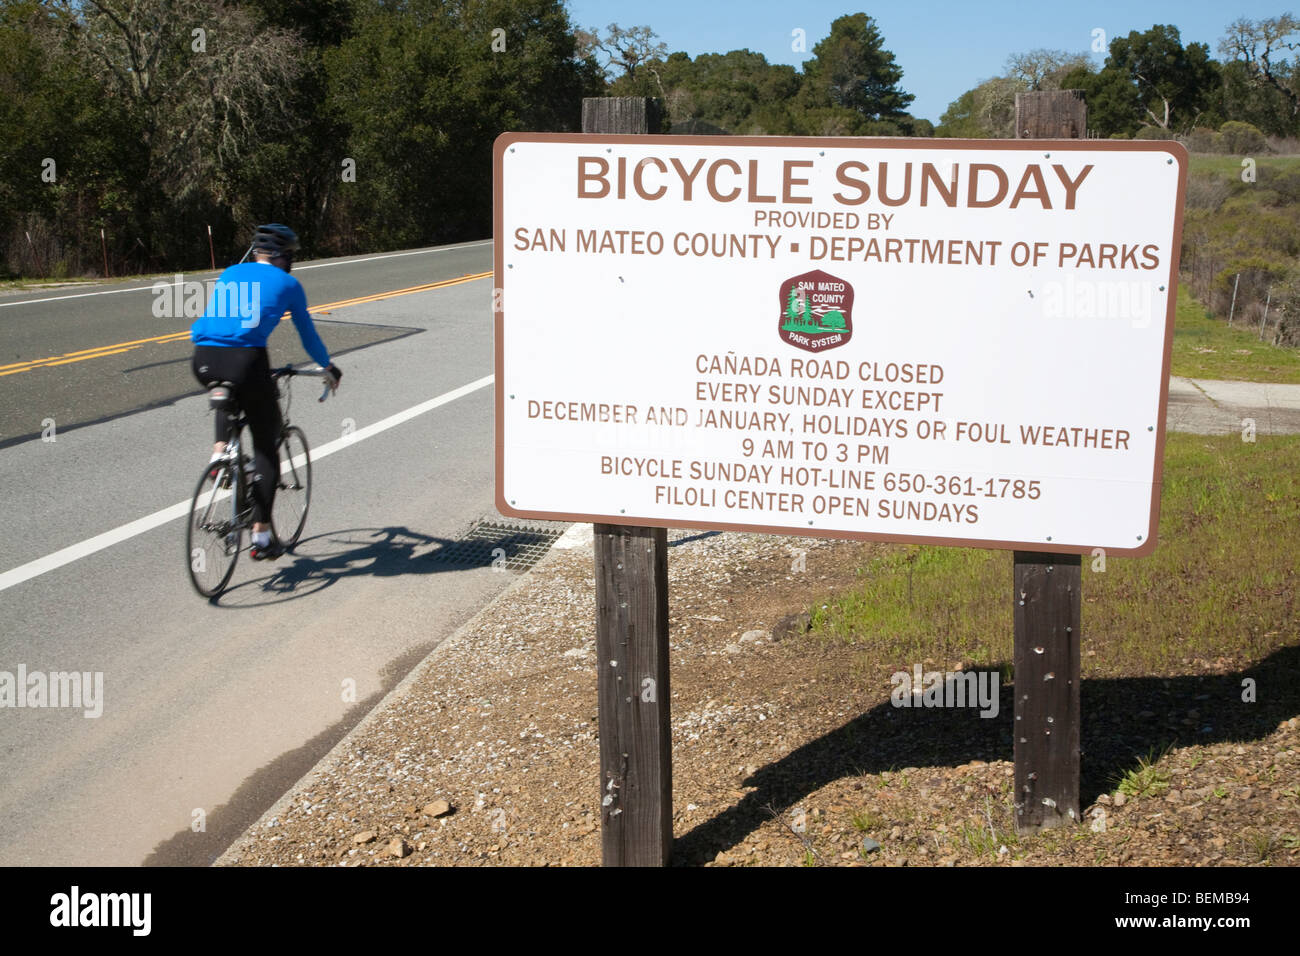 Canada Road is closed to car traffic on Bicycle Sundays so that bicyclists can enjoy the road safely. Stock Photo